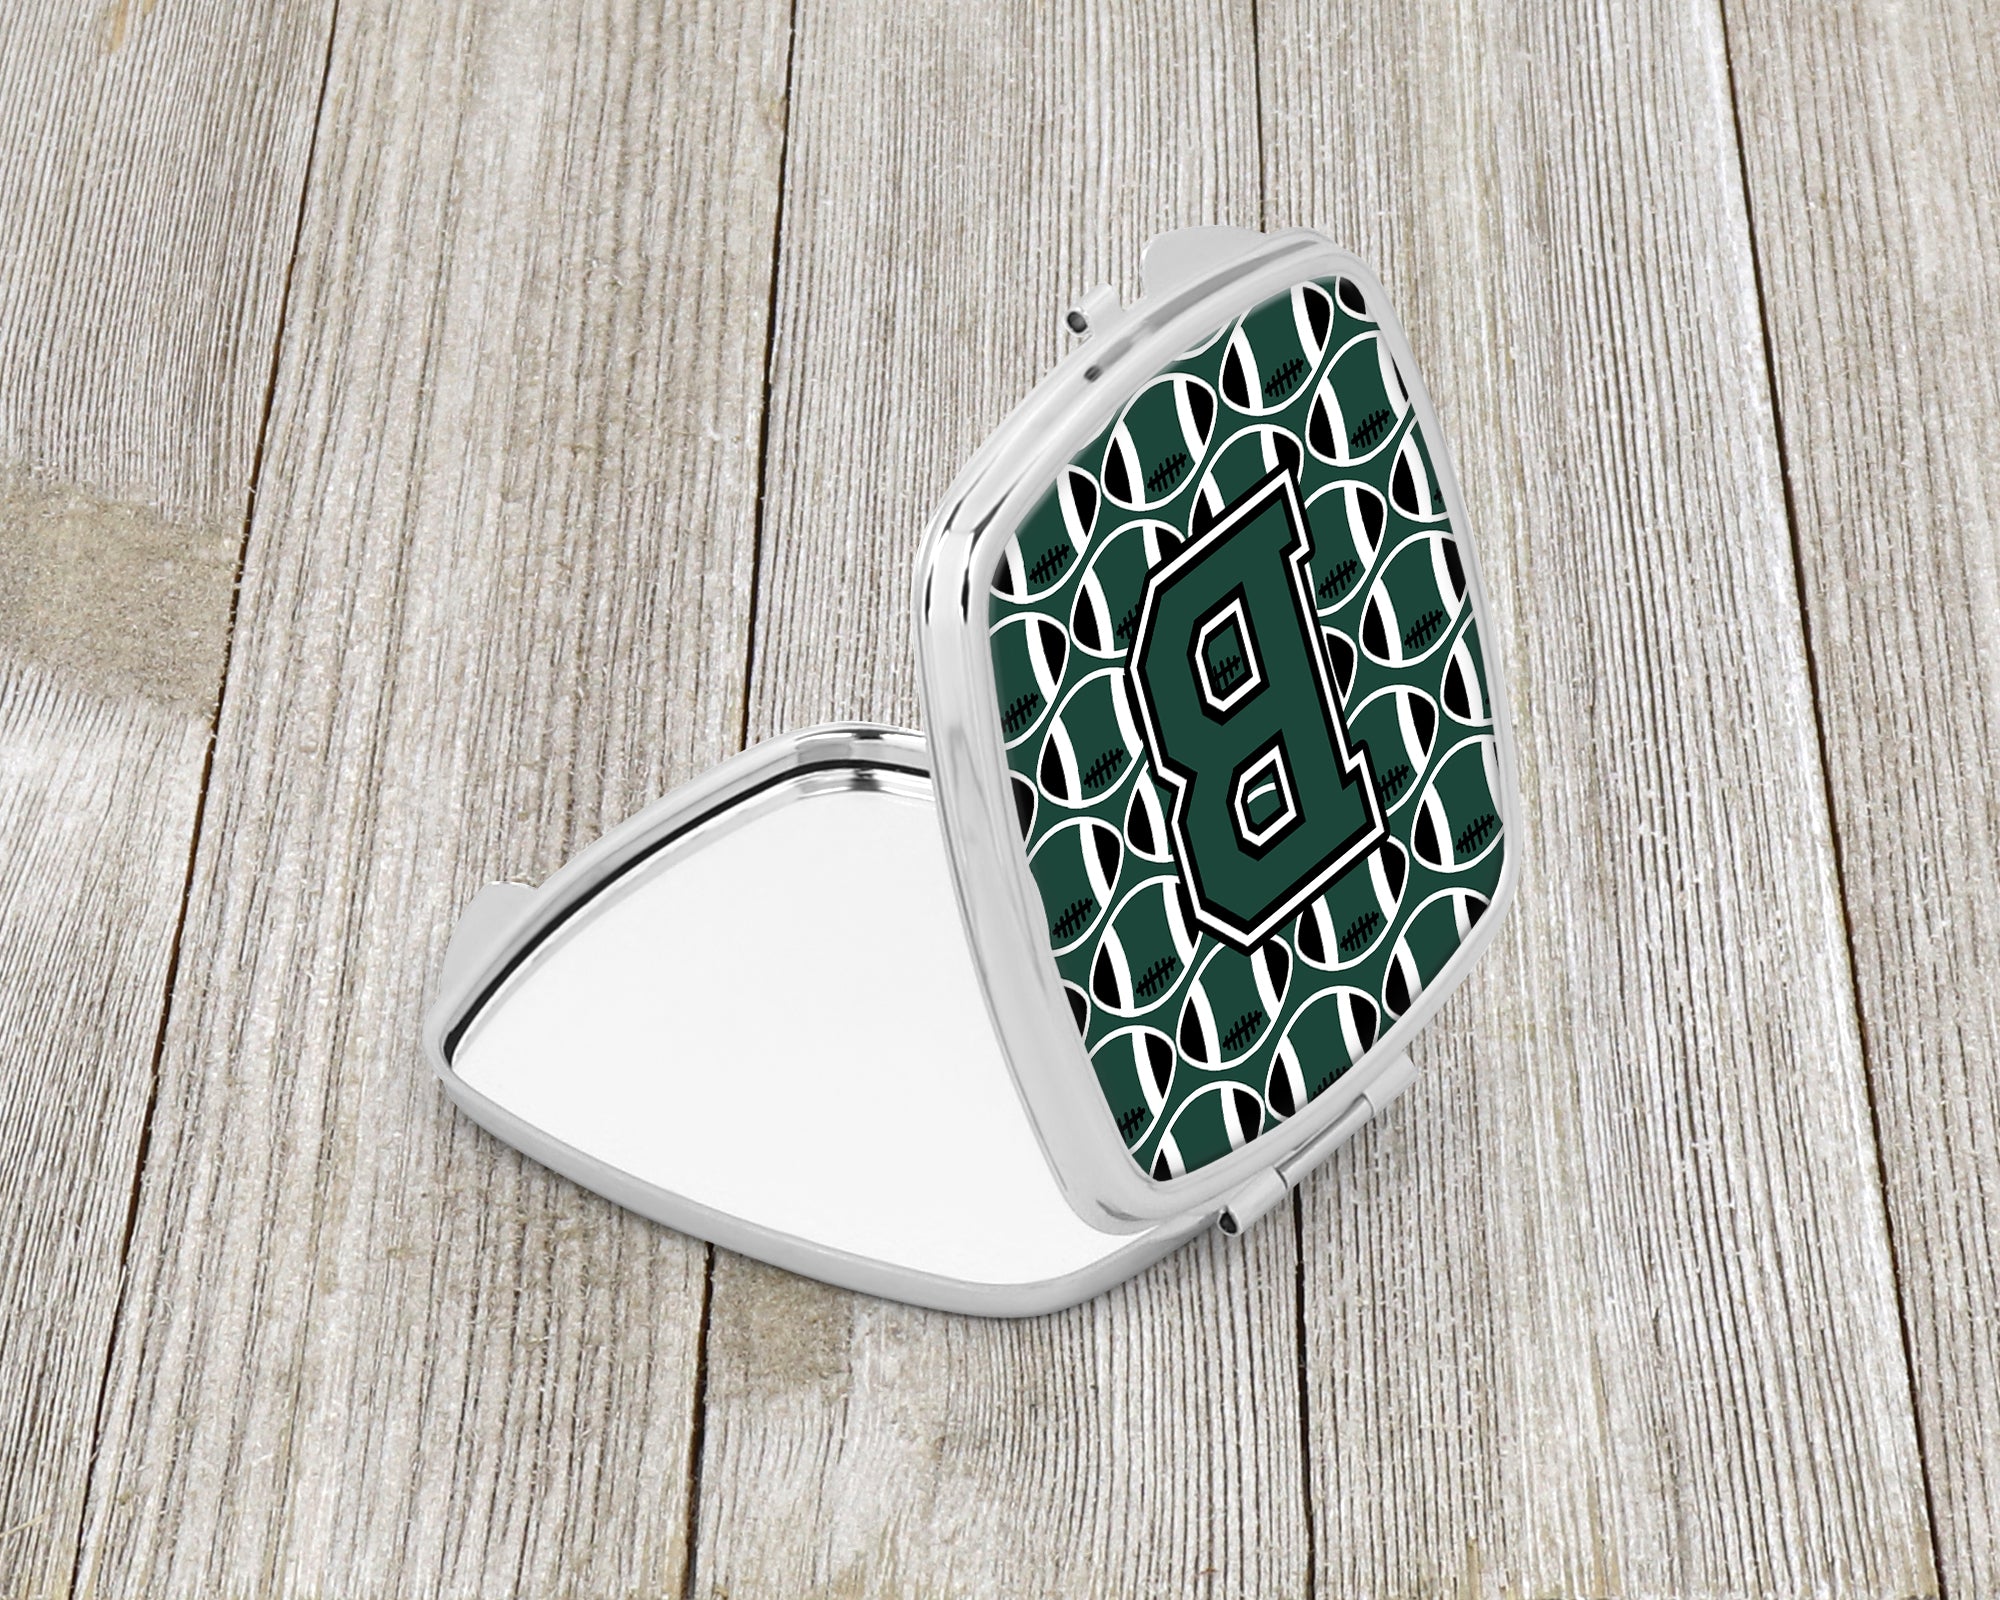 Letter B Football Green and White Compact Mirror CJ1071-BSCM  the-store.com.